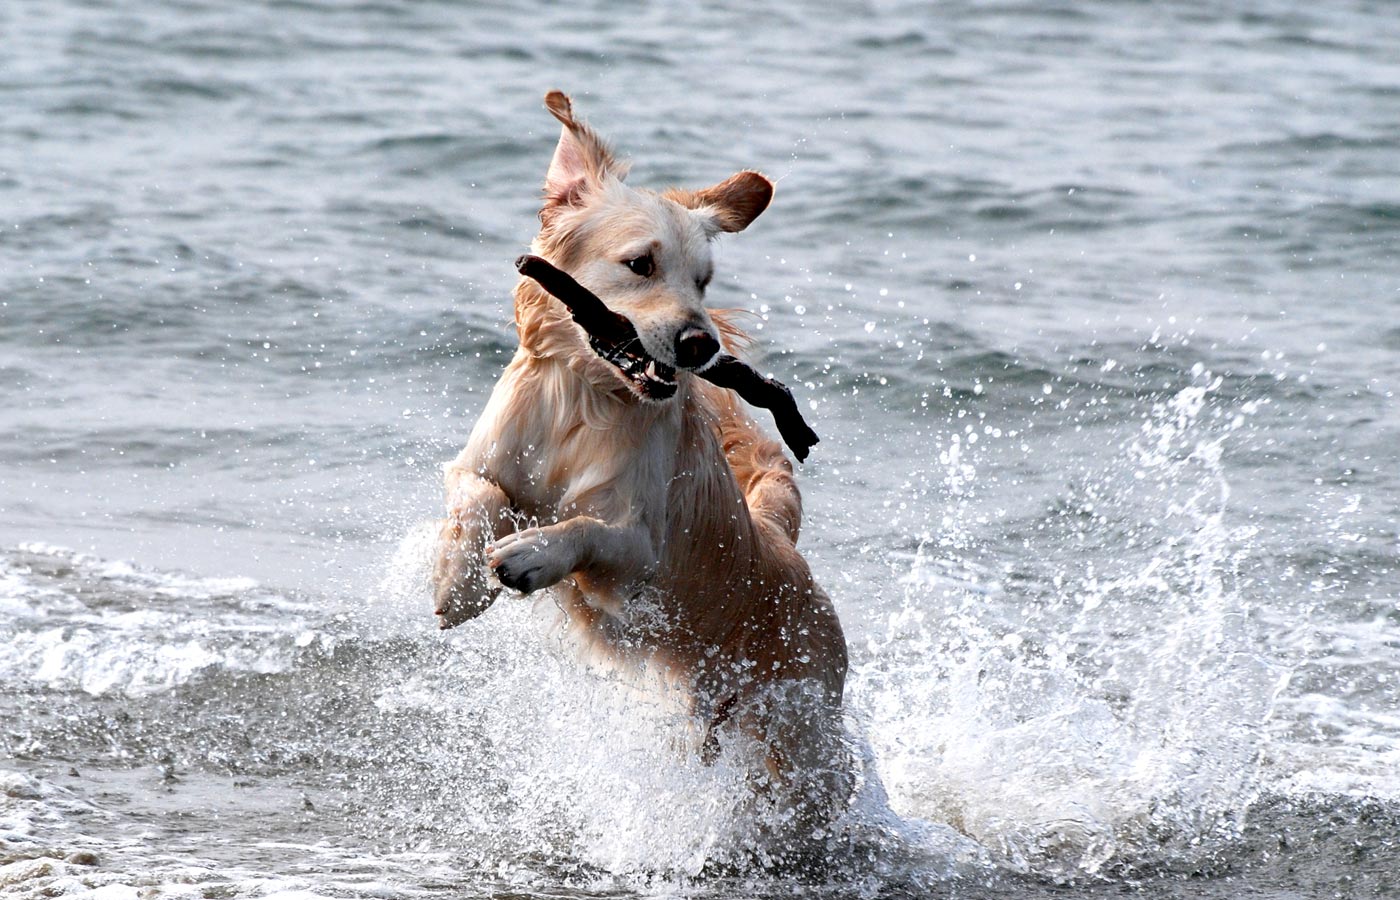 A dog with a stick playing in the waves at the beach.